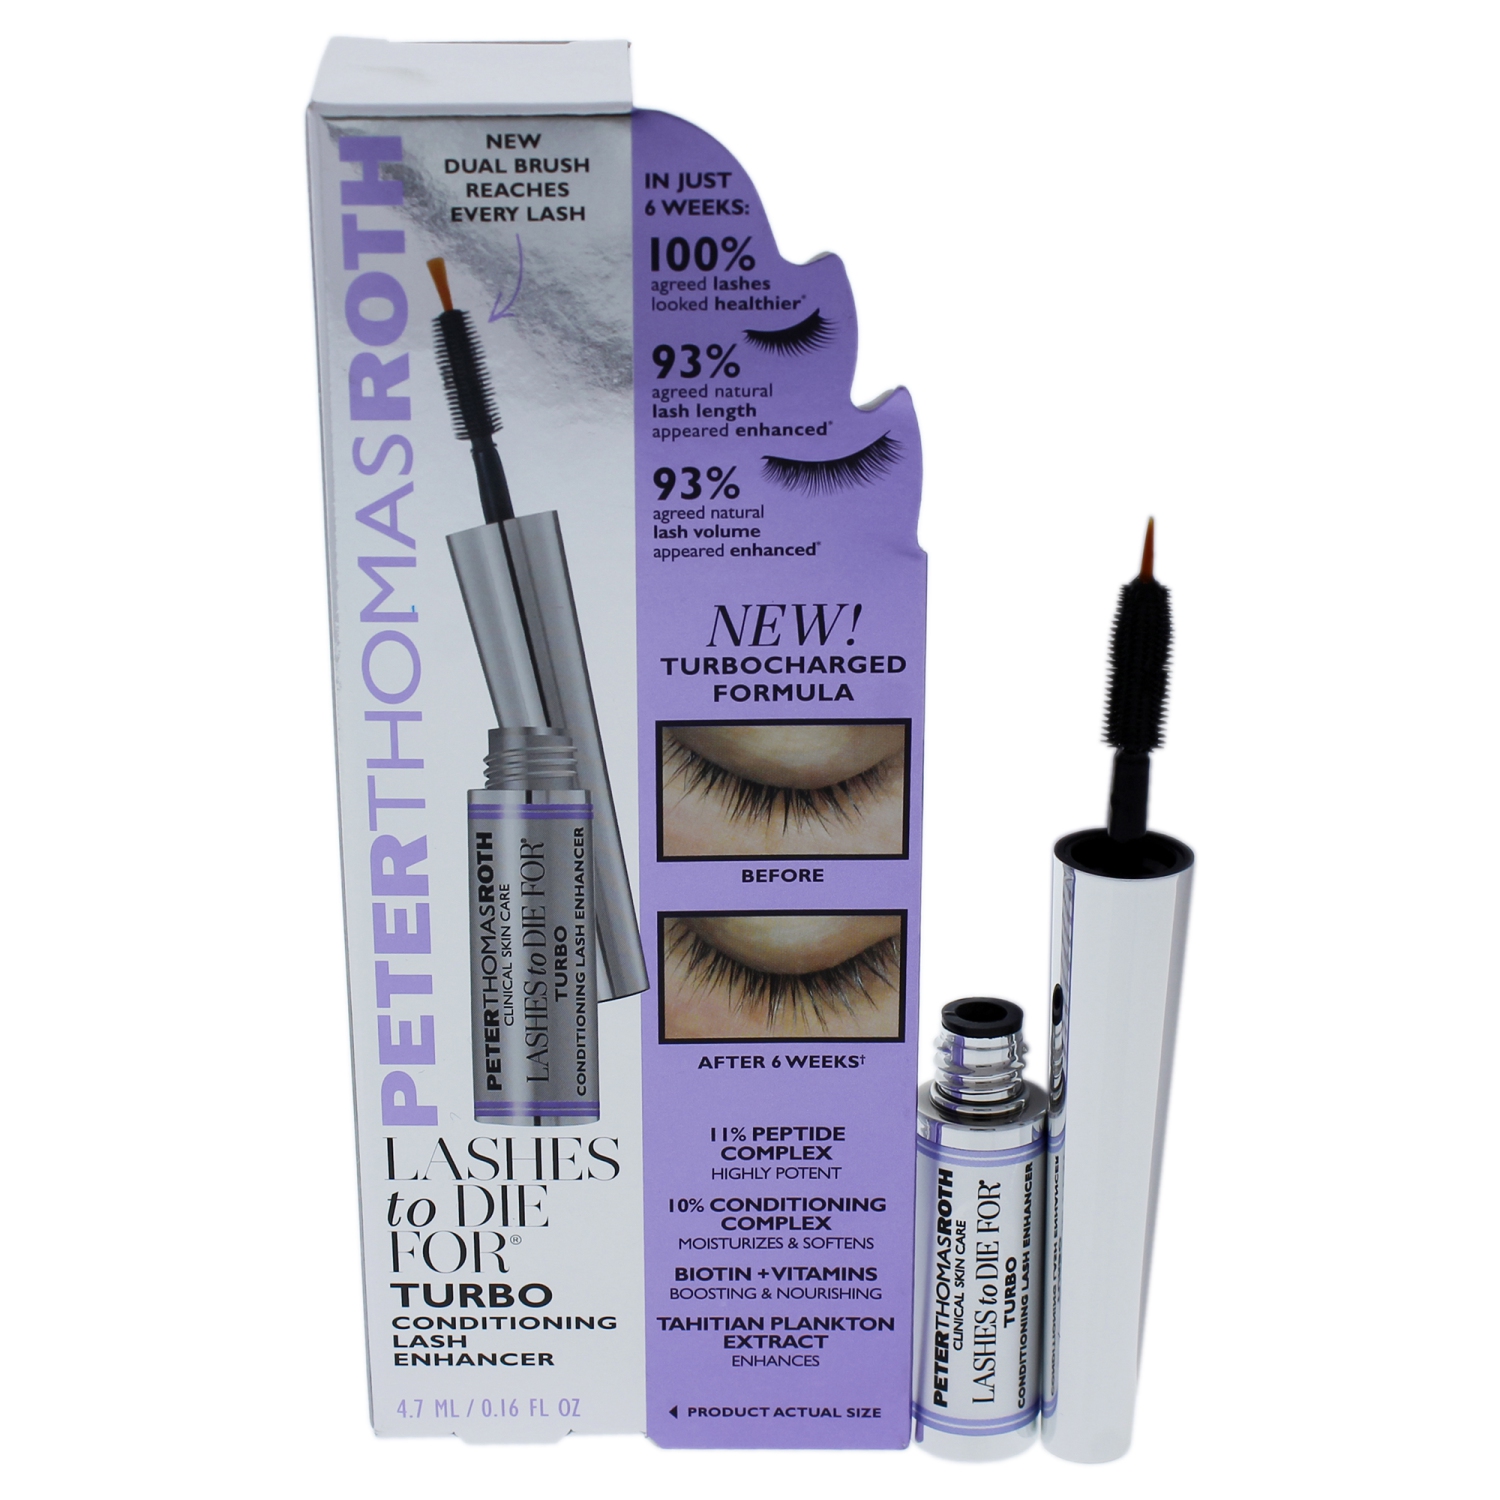 Lashes To Die for Turbo Conditioning Lash Enhancer by Peter Thomas Roth for Women - 0.16 oz Treatment